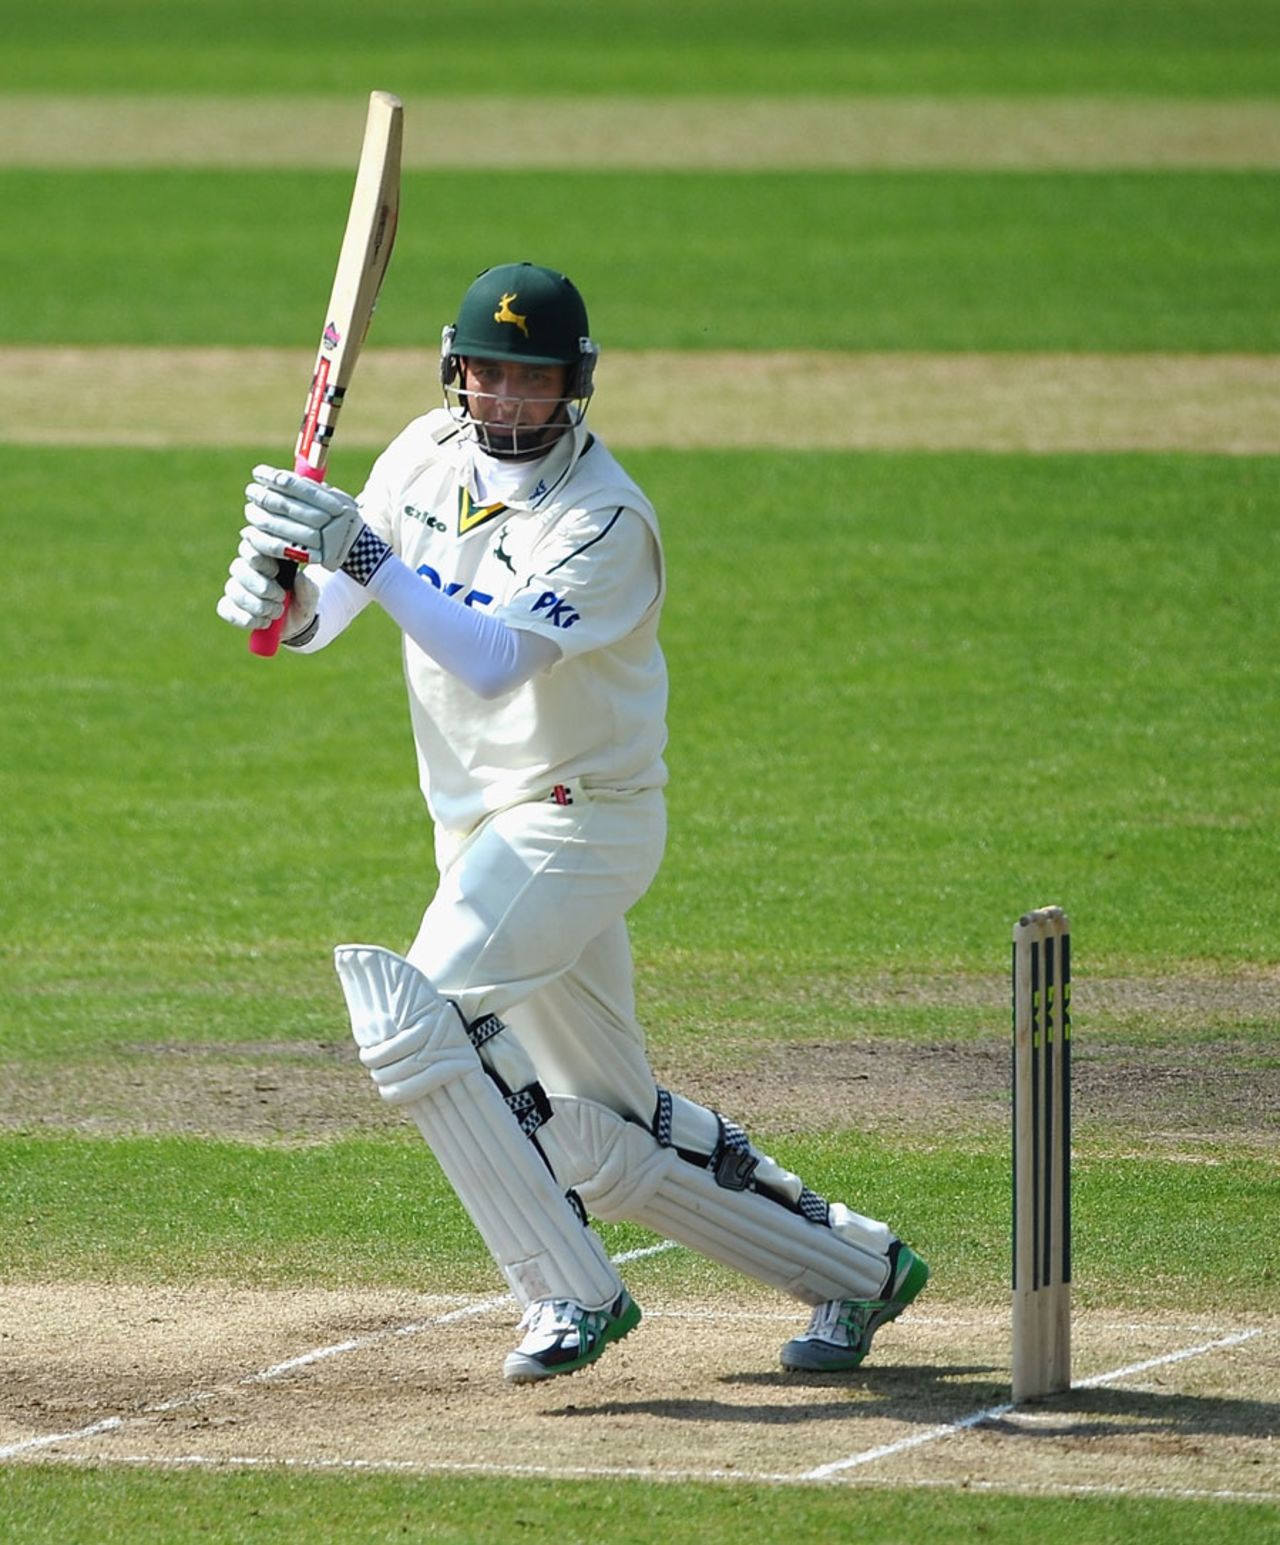 Paul Franks secured a first-innings lead for Notts with a hard-hitting 82, Nottinghamshire v Worcestershire, County Championship, Division One, Trent Bridge, April 28, 2011